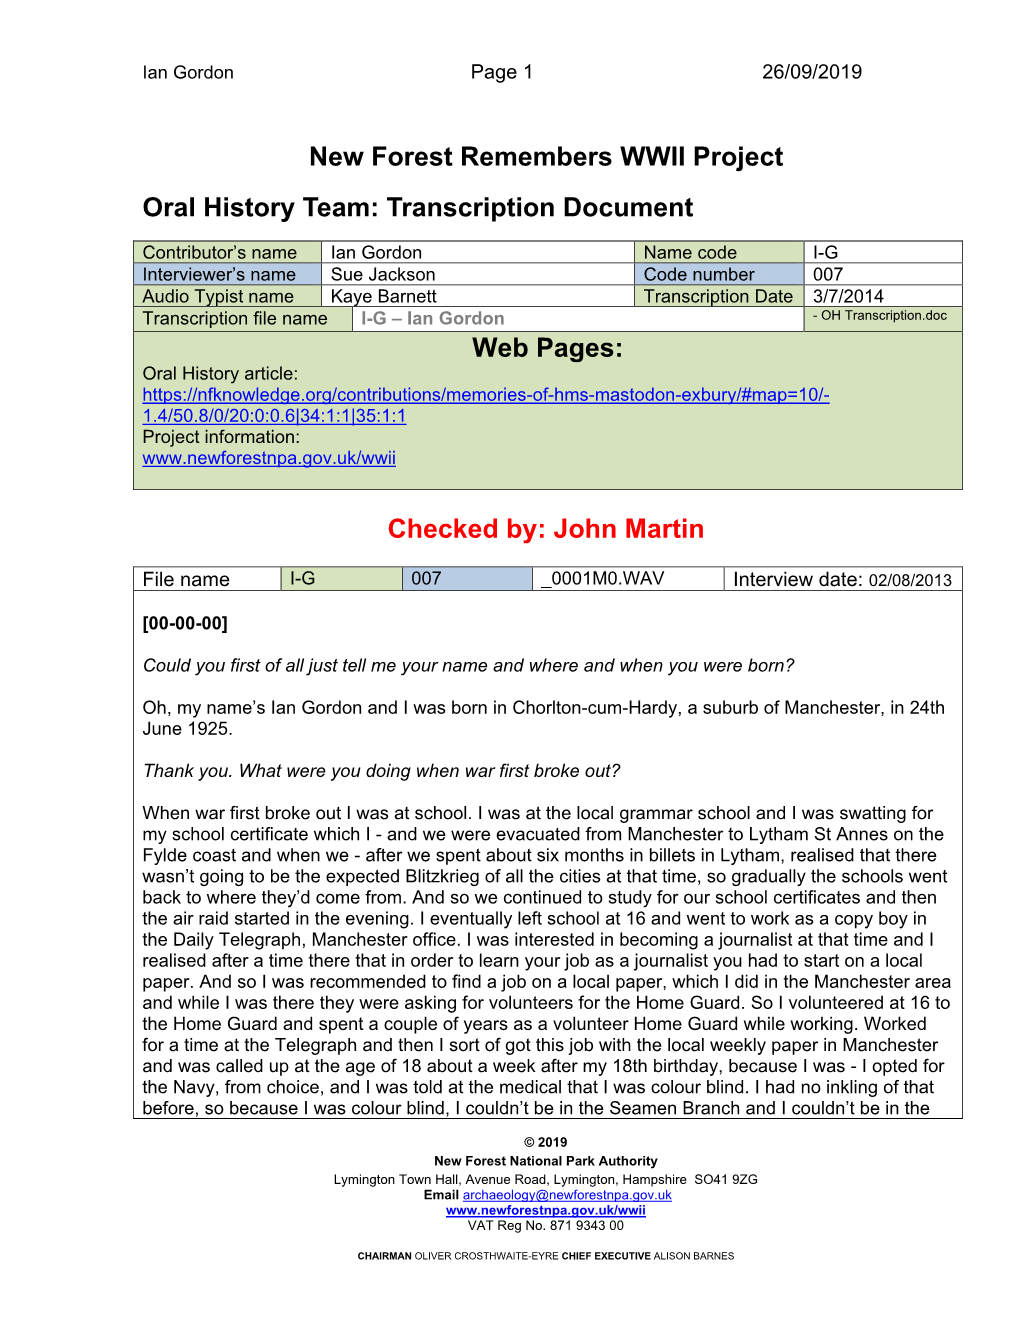 New Forest Remembers WWII Project Oral History Team: Transcription Document